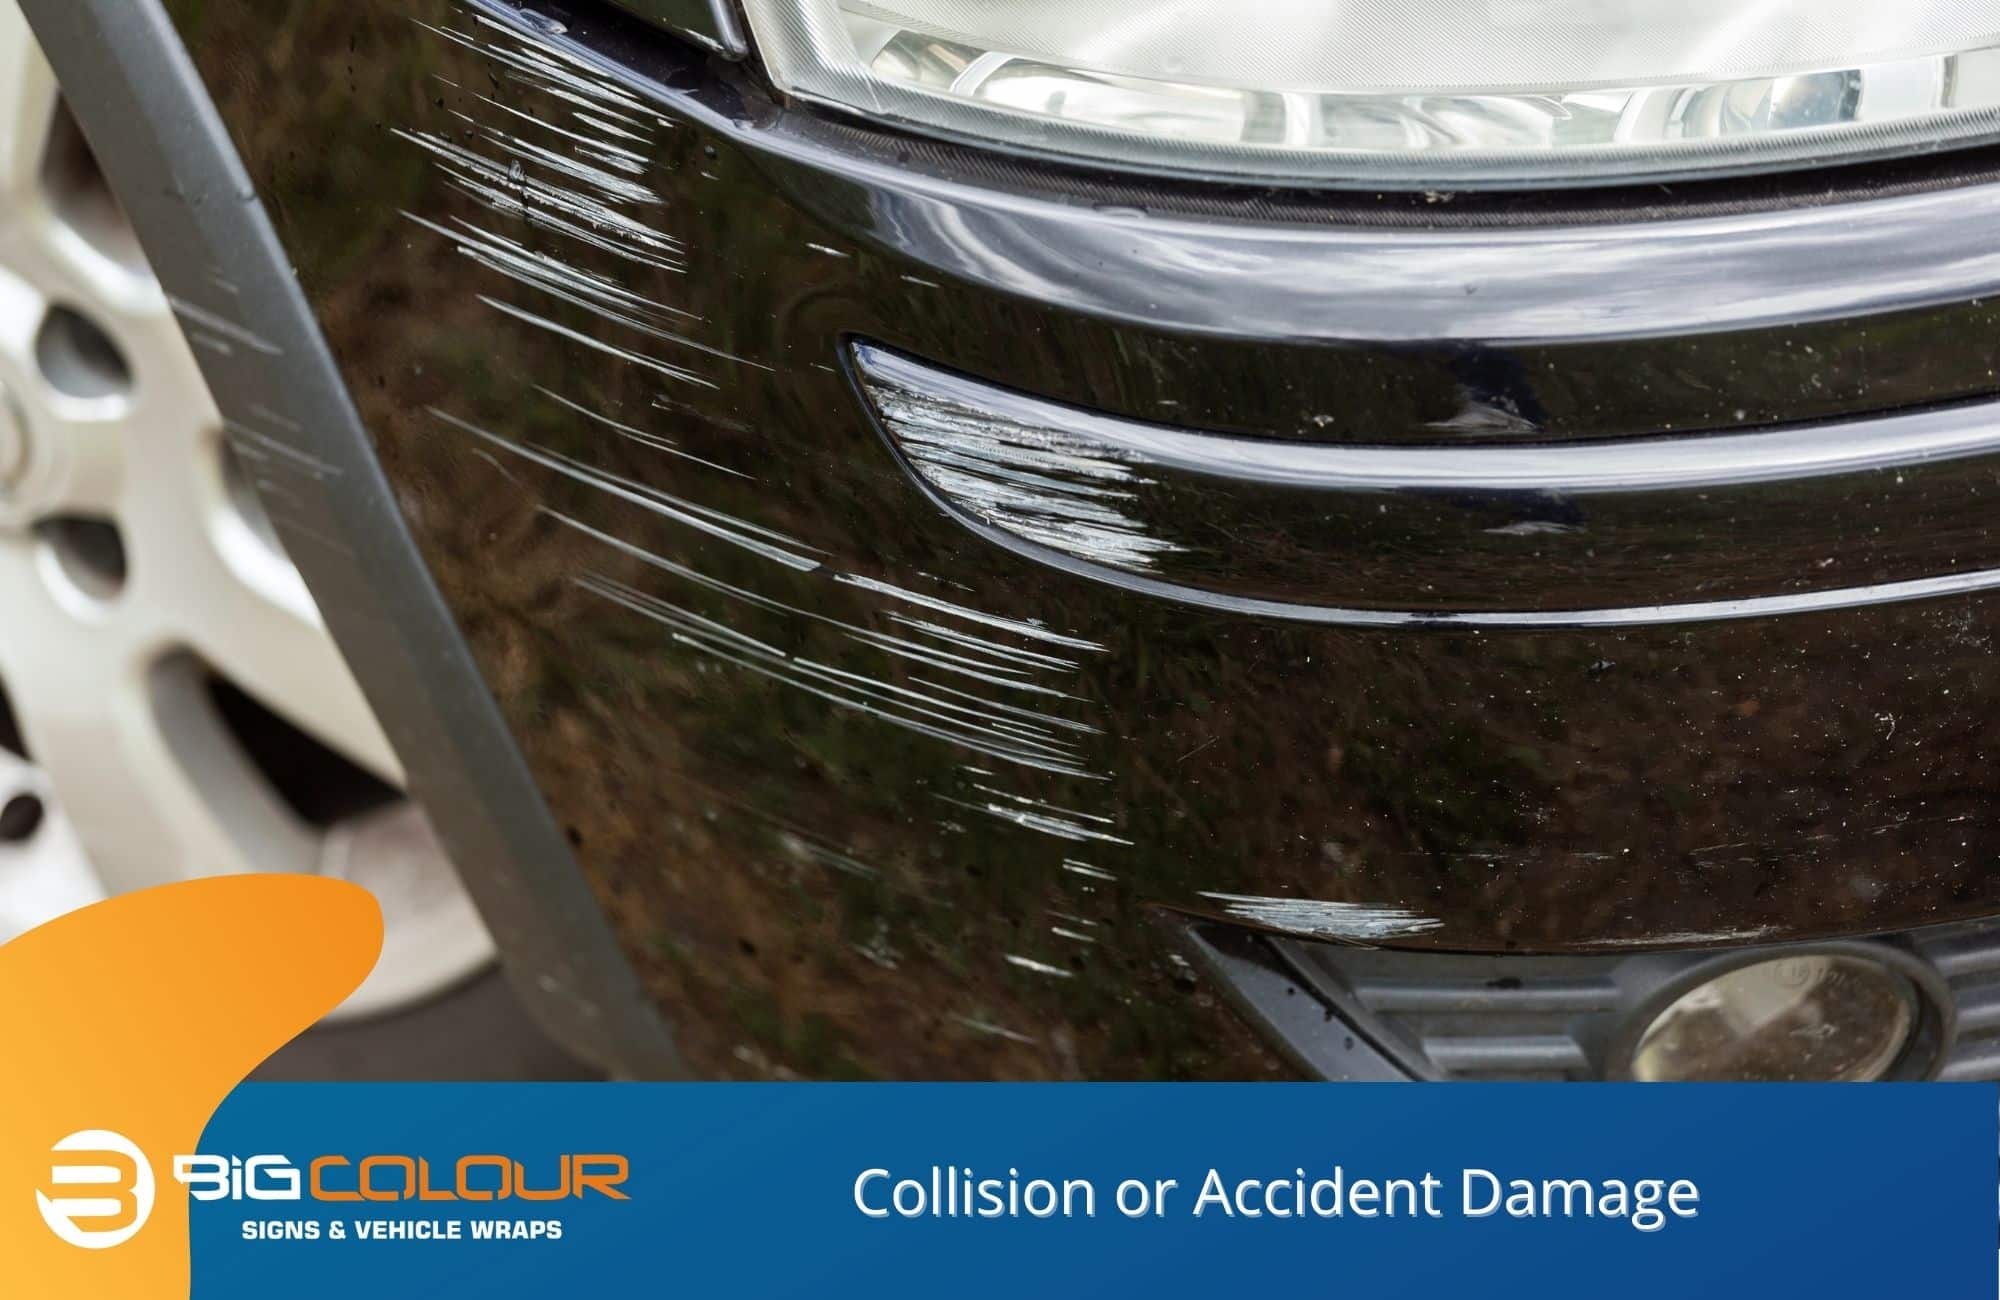 Collision or Accident Damage